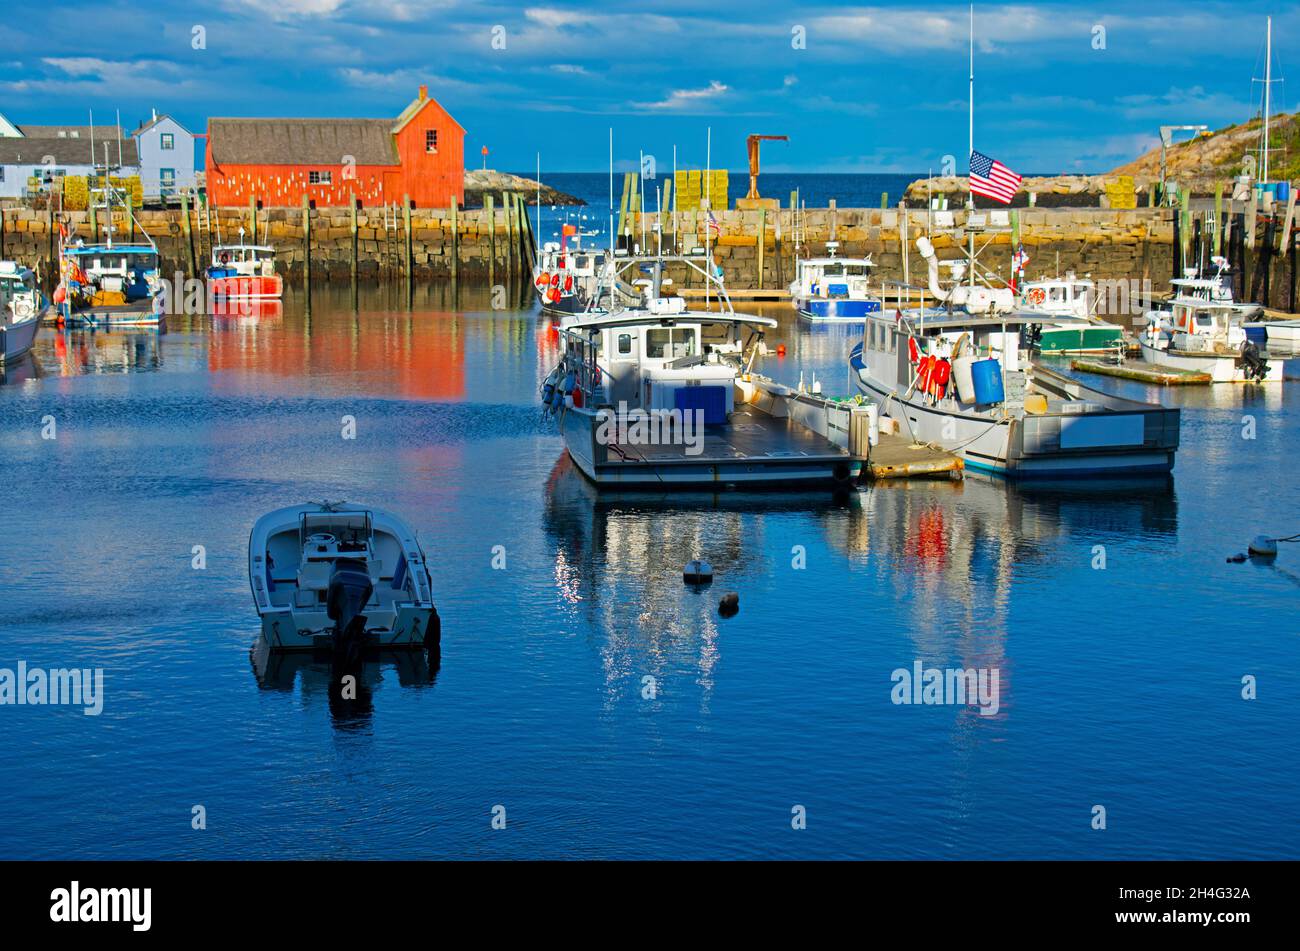 Red fishing shack in Rockport, Massachusetts, Motif # 1, and a nearby harbor filled with nautical vessels -23 Stock Photo